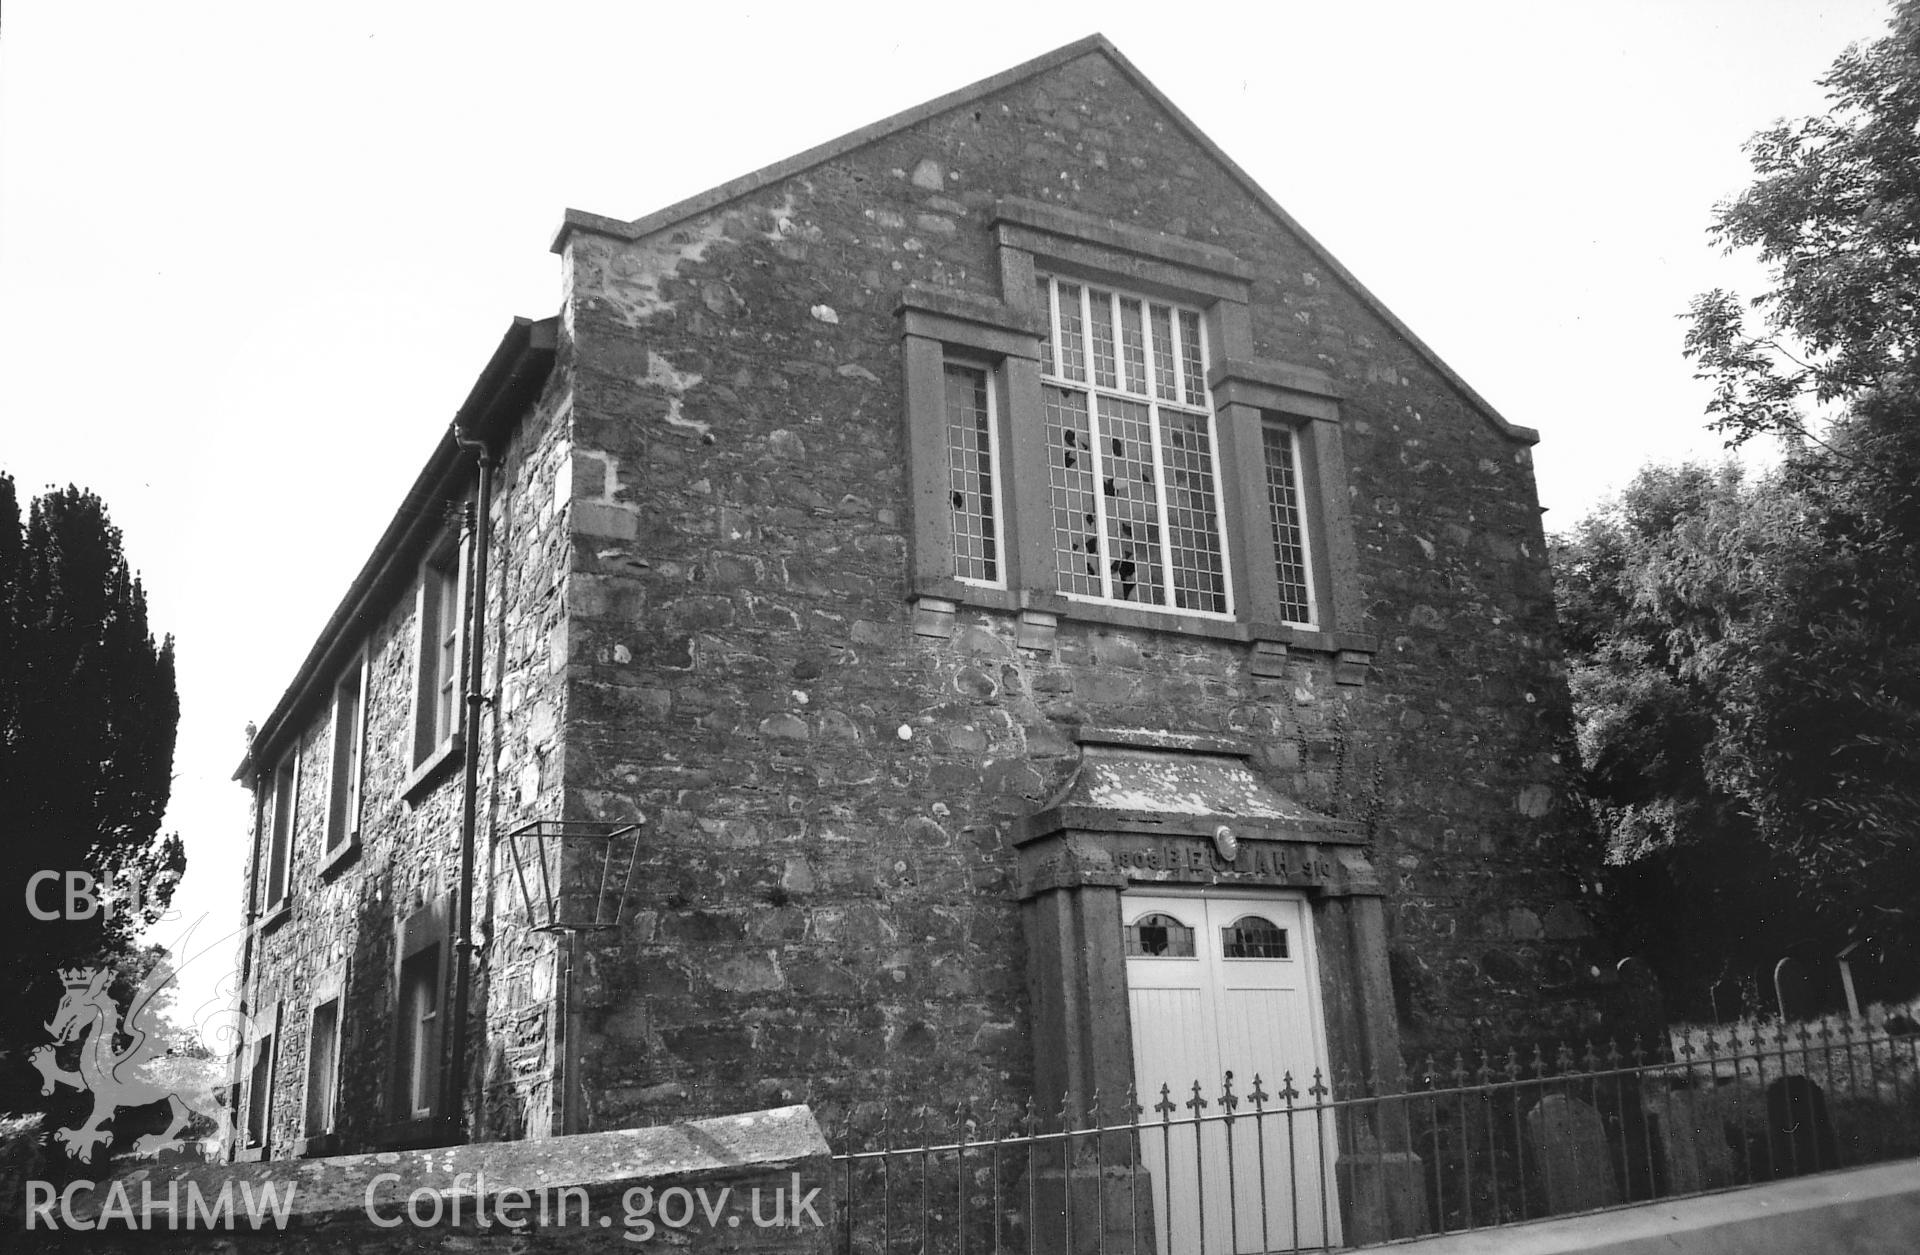 Digital copy of a black and white photograph showing an exterior view of Beulah Baptist Chapel, Little Newcastle taken by Robert Scourfield, 1995.